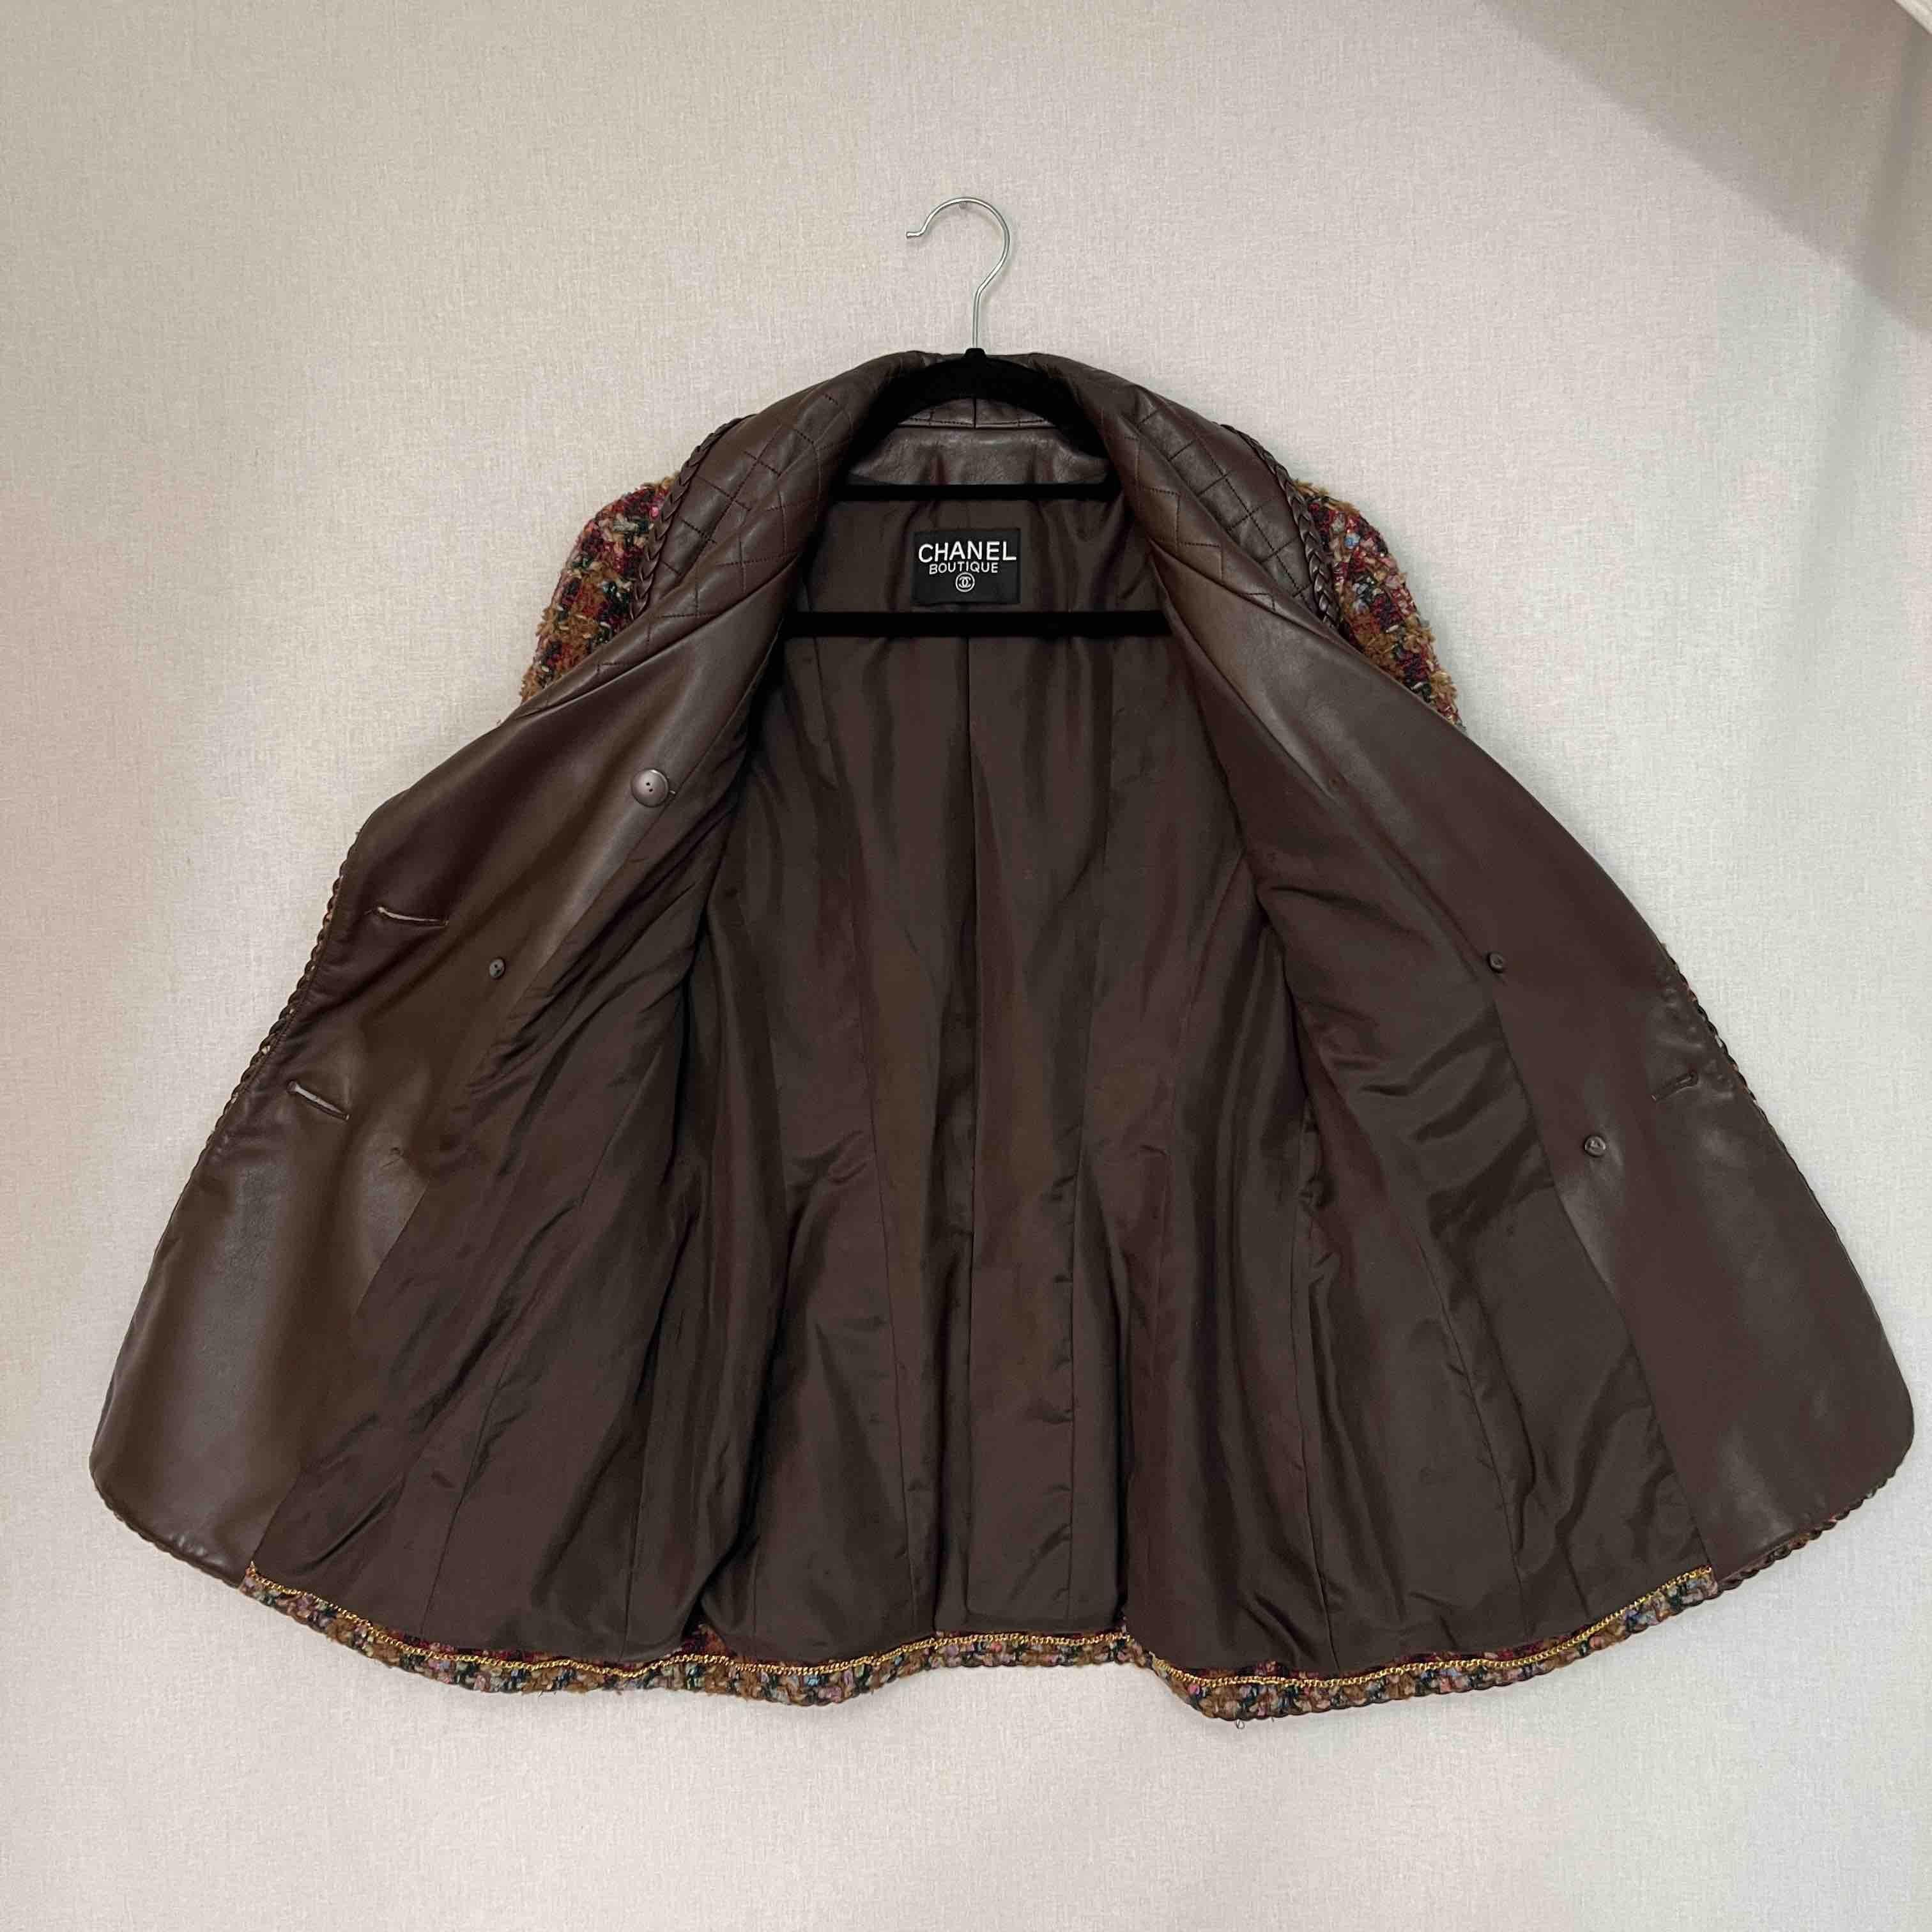 Black CHANEL Jacket in Brown Tweed and Leather Collar Size 40fr